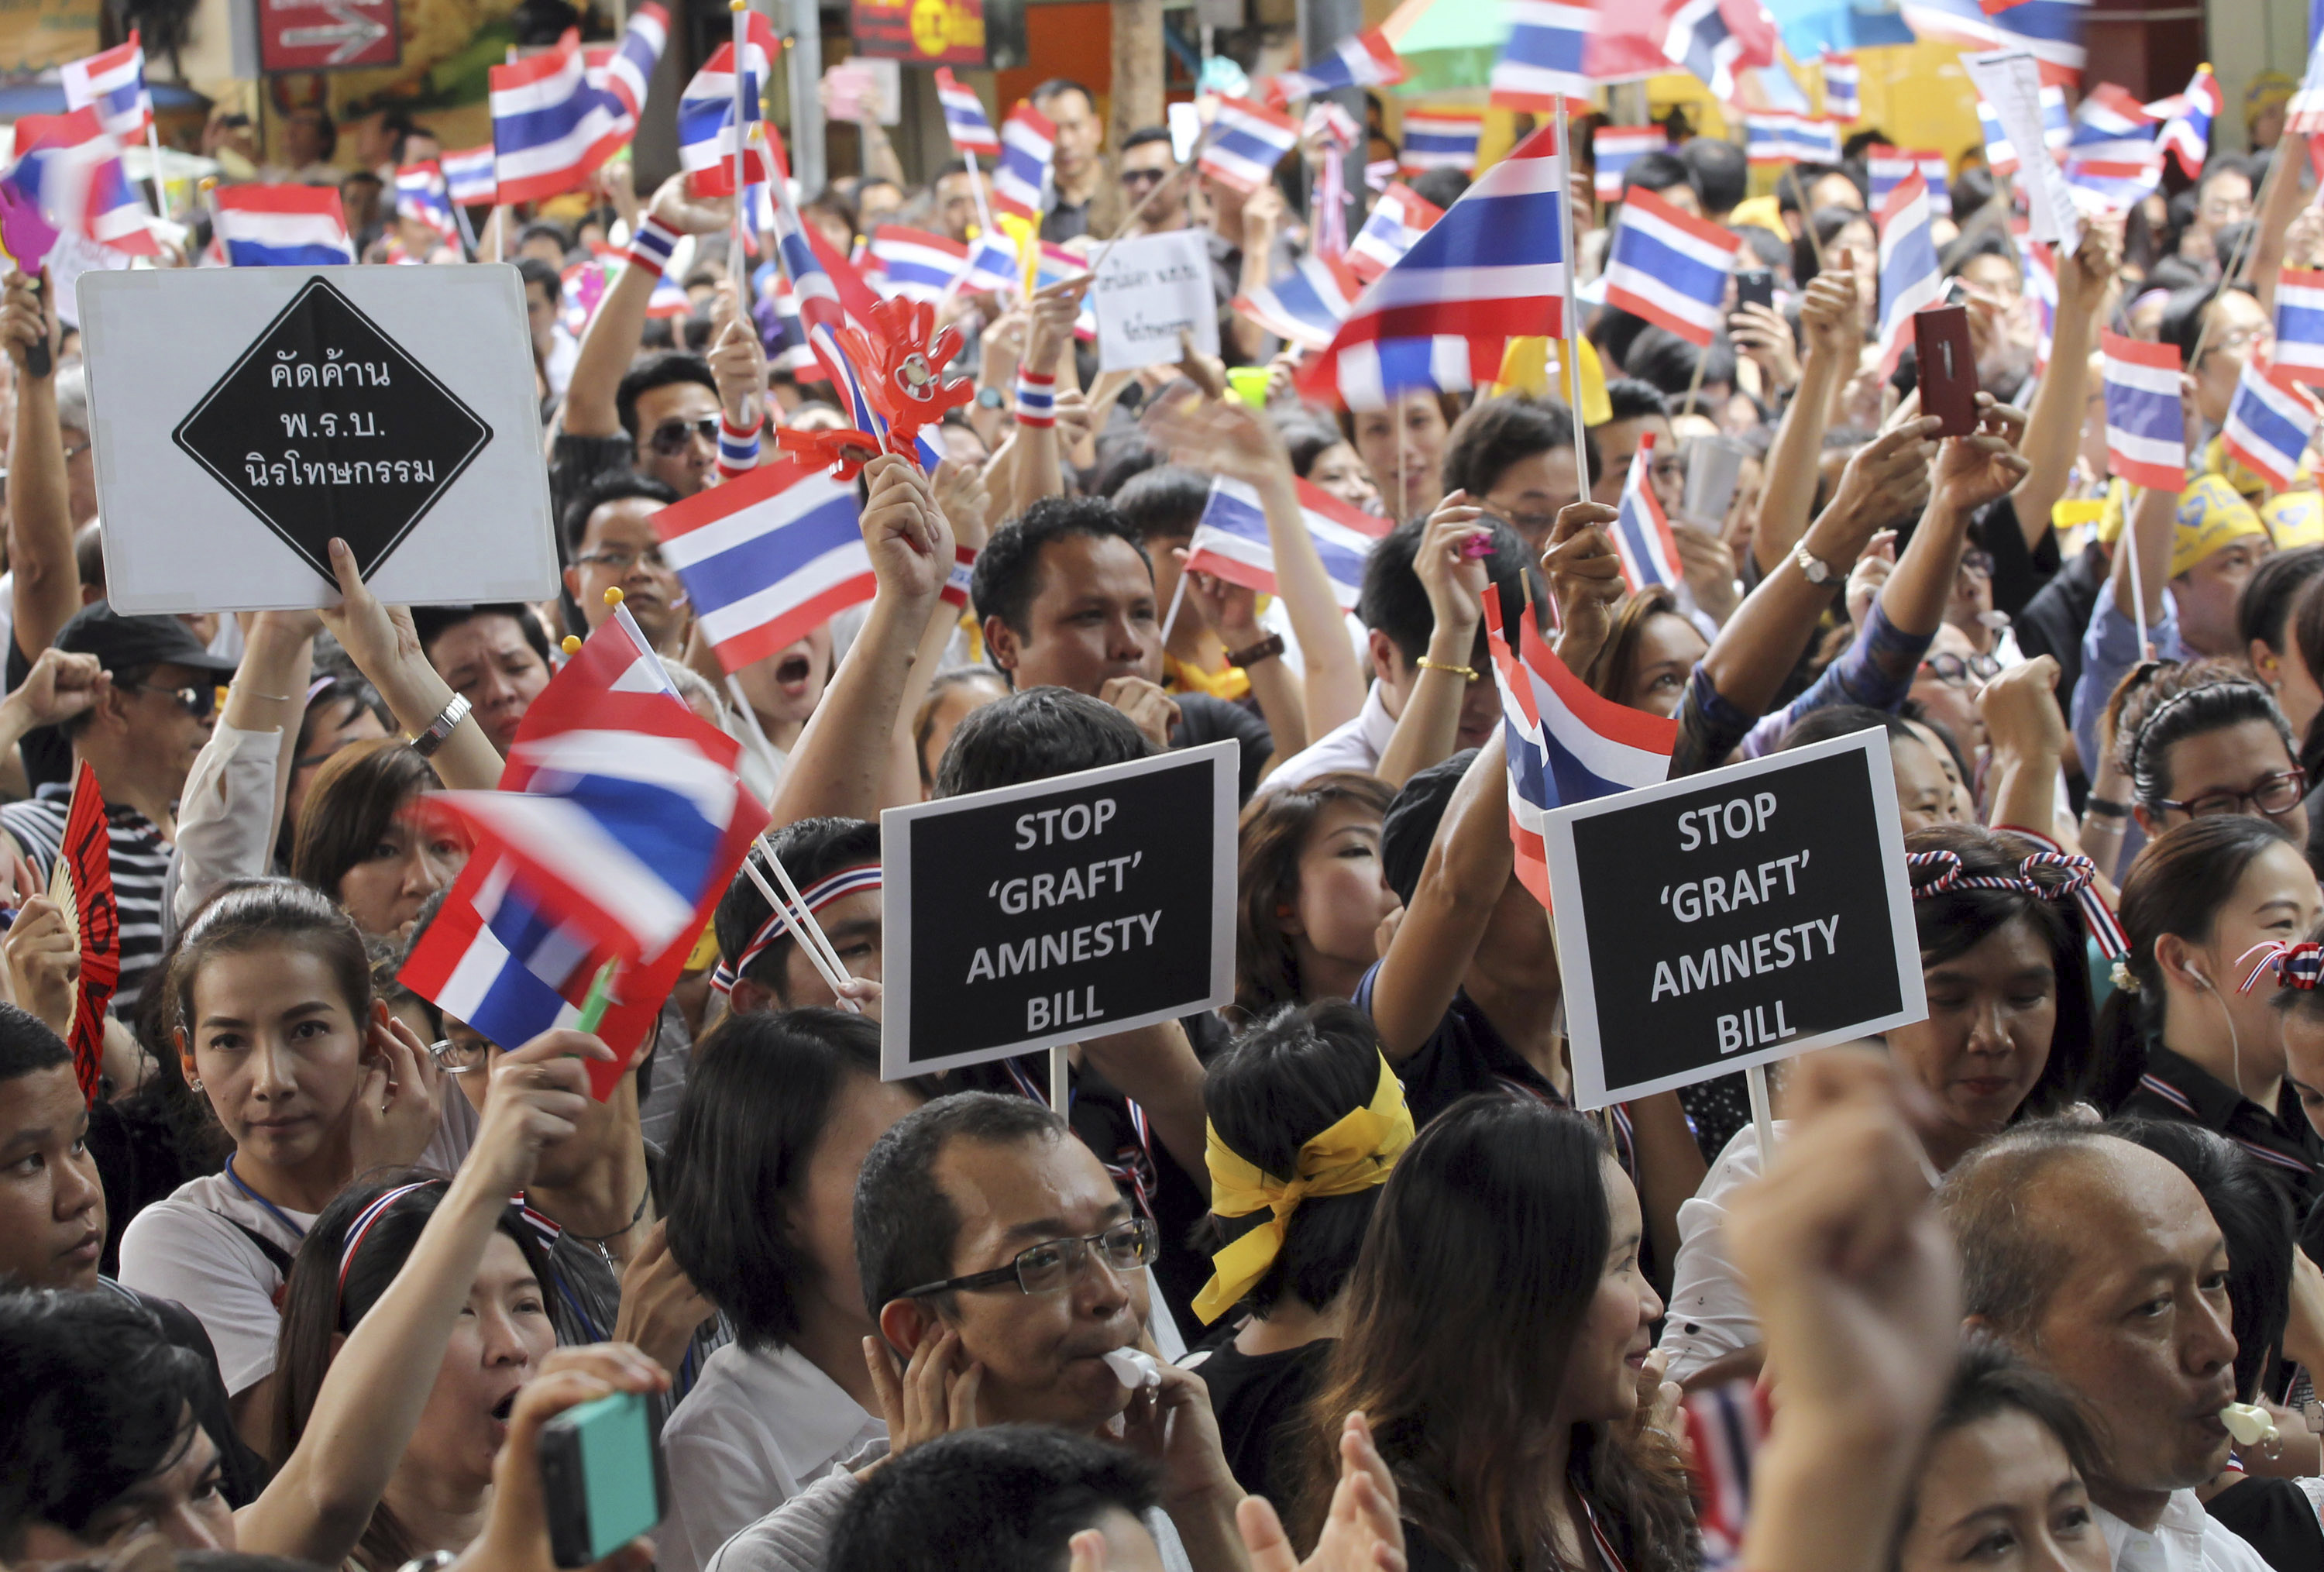 Thai workers at an anti-amnesty bill demonstration in Bangkok on Wednesday. Photo: AP